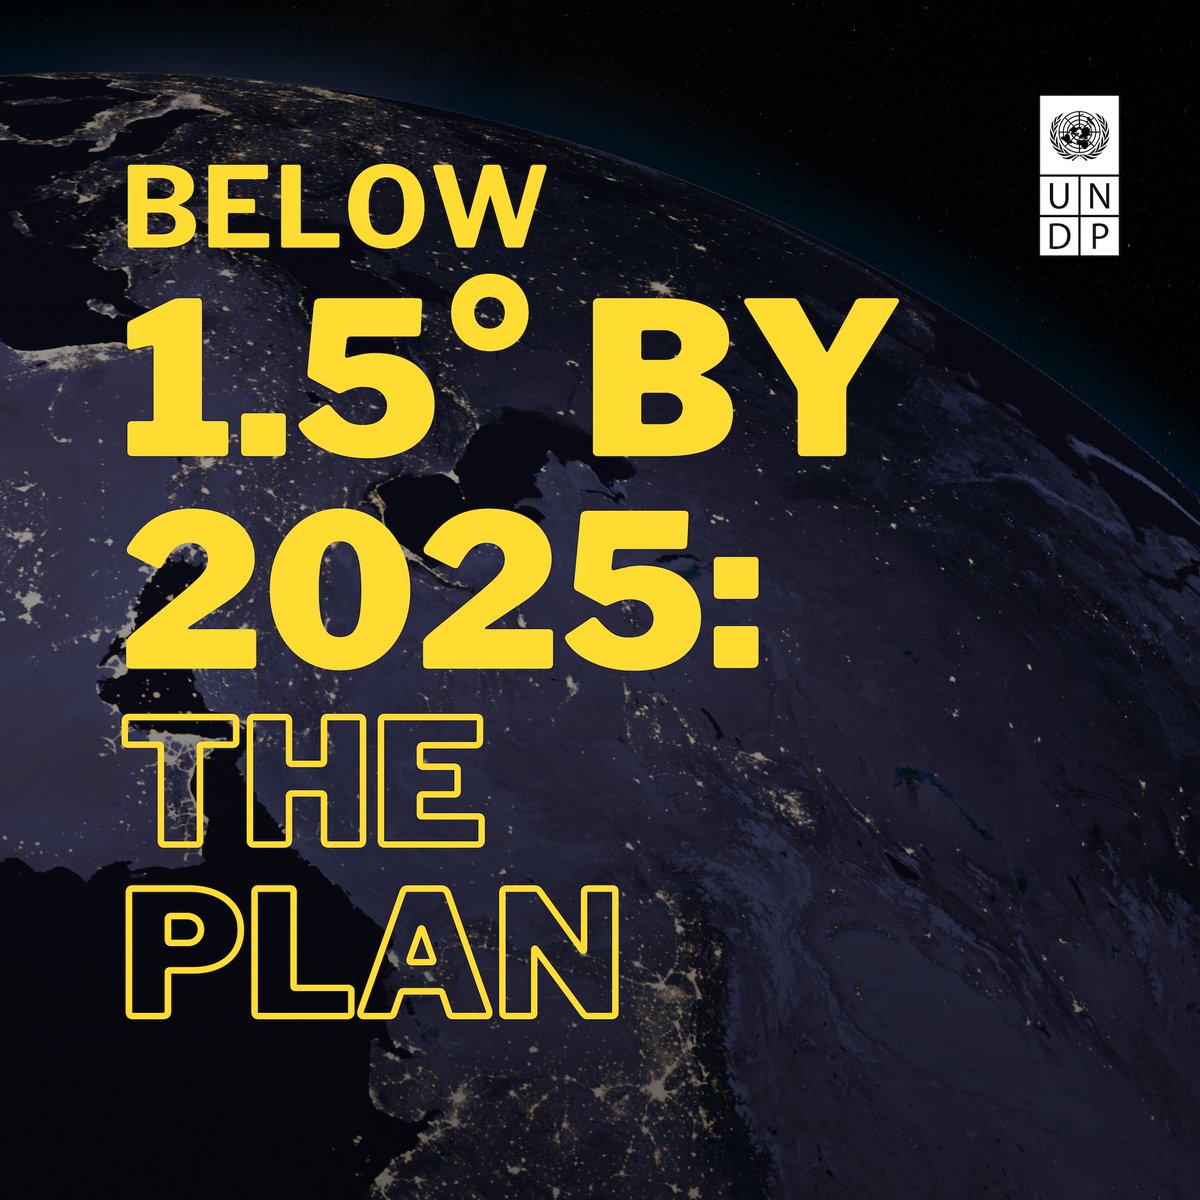 The stakes could not be higher. If we want to limit temperature rise to below 1.5° by 2025, now is the time to break business-as-usual. Join us live 3-4:30pm EST as @antonioguterres, @ASteiner, and @Cassie_Flynn unveil #ClimatePromise 2025: go.undp.org/ZZf